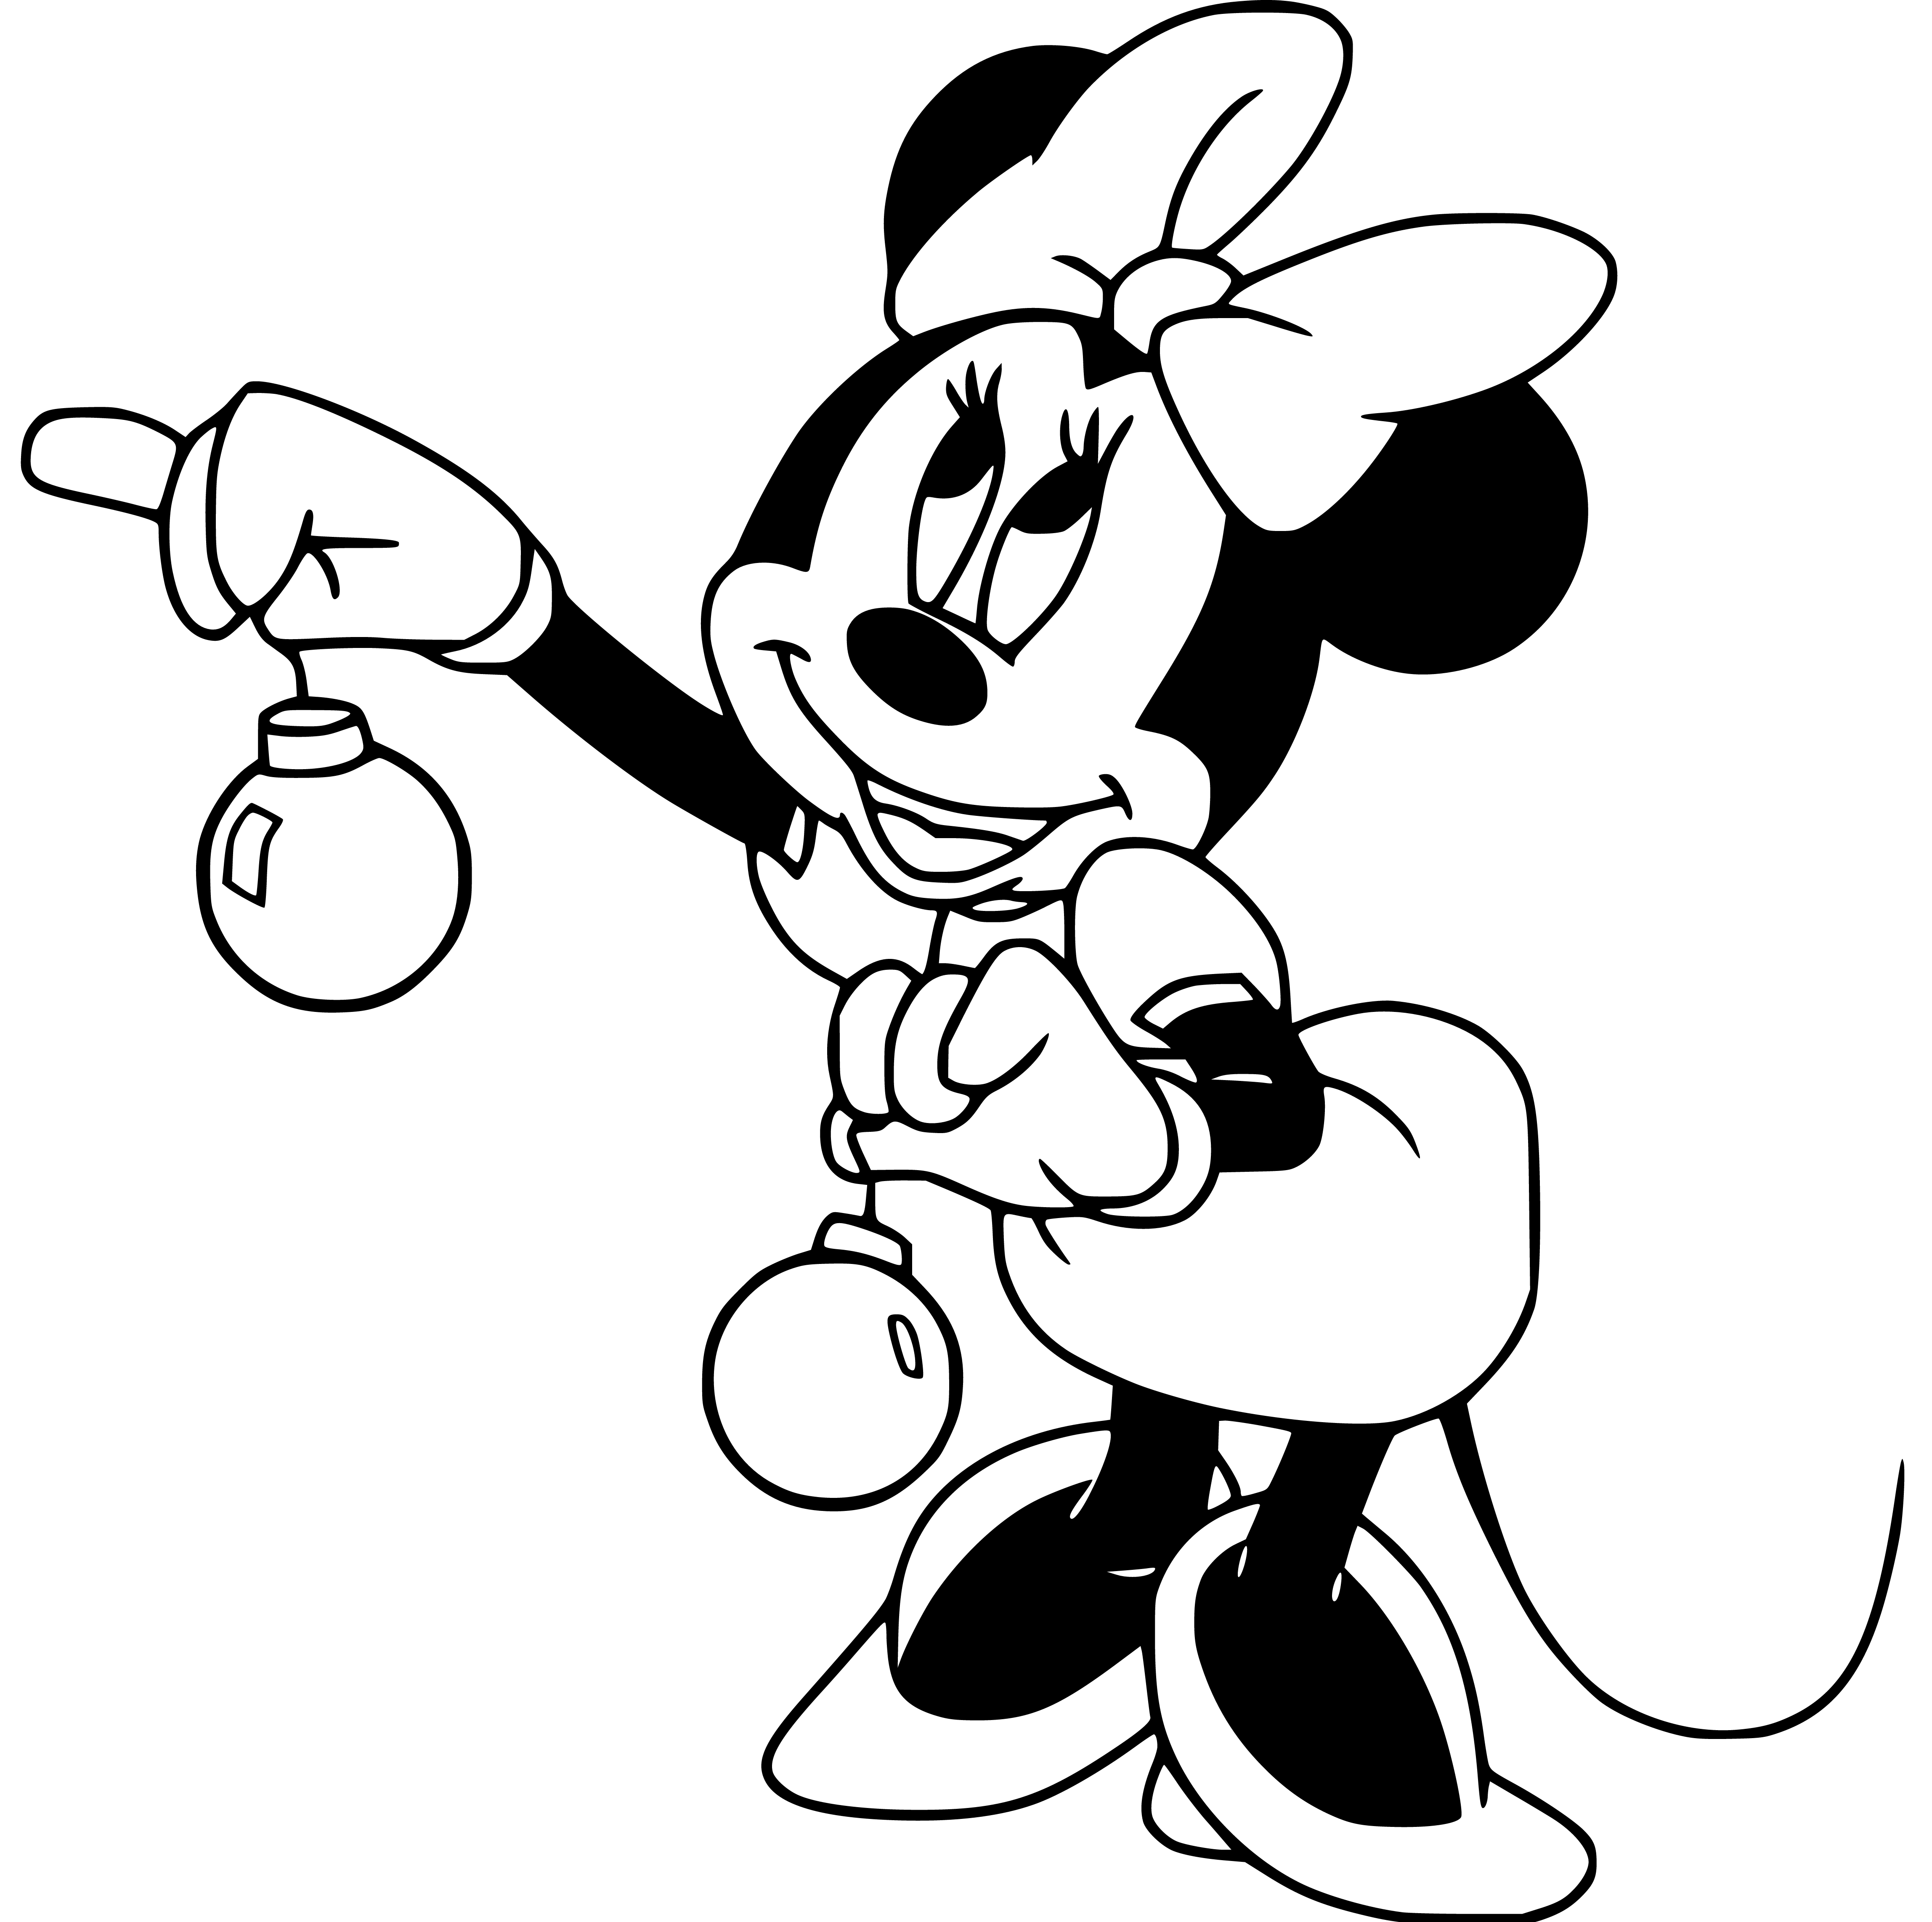 Simple Minnie Mouse Coloring Page Easy for Kids - SheetalColor.com